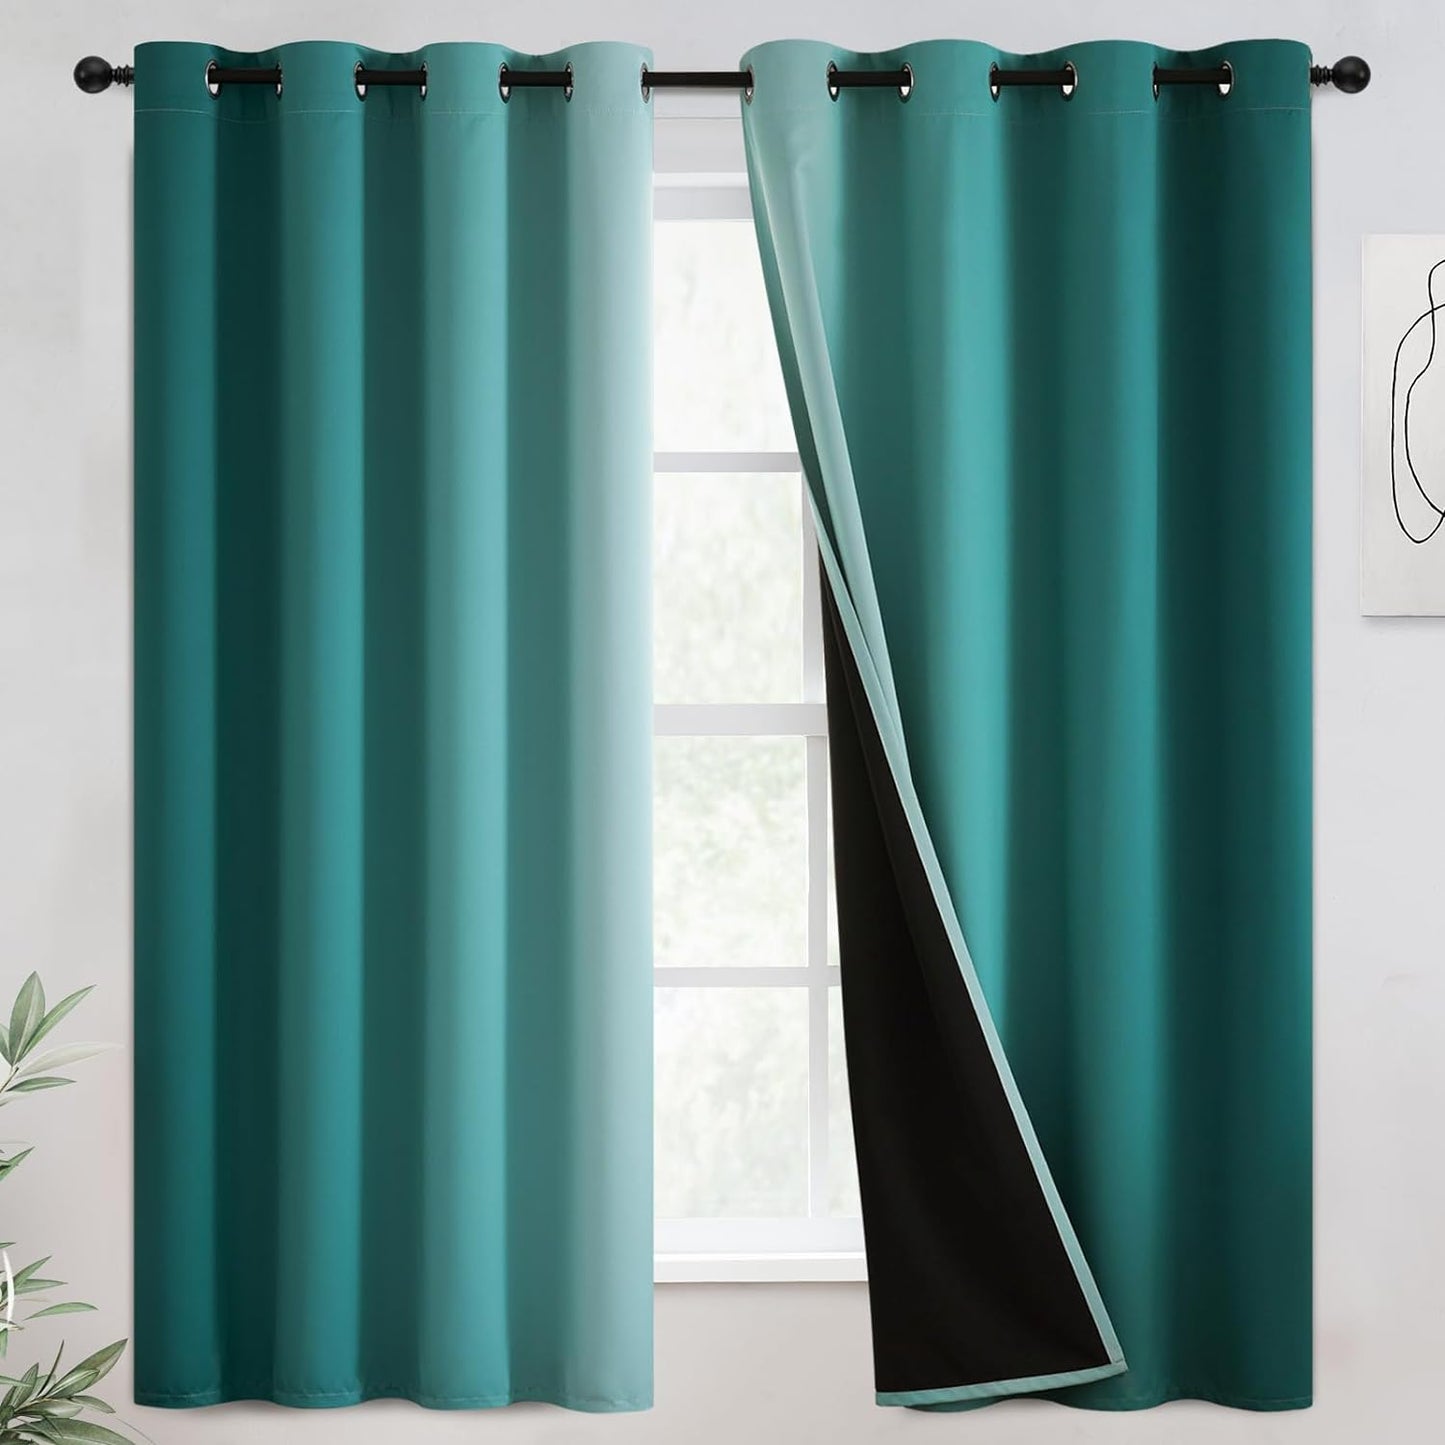 COSVIYA 100% Blackout Curtains & Drapes Ombre Purple Curtains 63 Inch Length 2 Panels,Full Room Darkening Grommet Gradient Insulated Thermal Window Curtains for Bedroom/Living Room,52X63 Inches  COSVIYA Teal To Greyish White 52W X 63L 